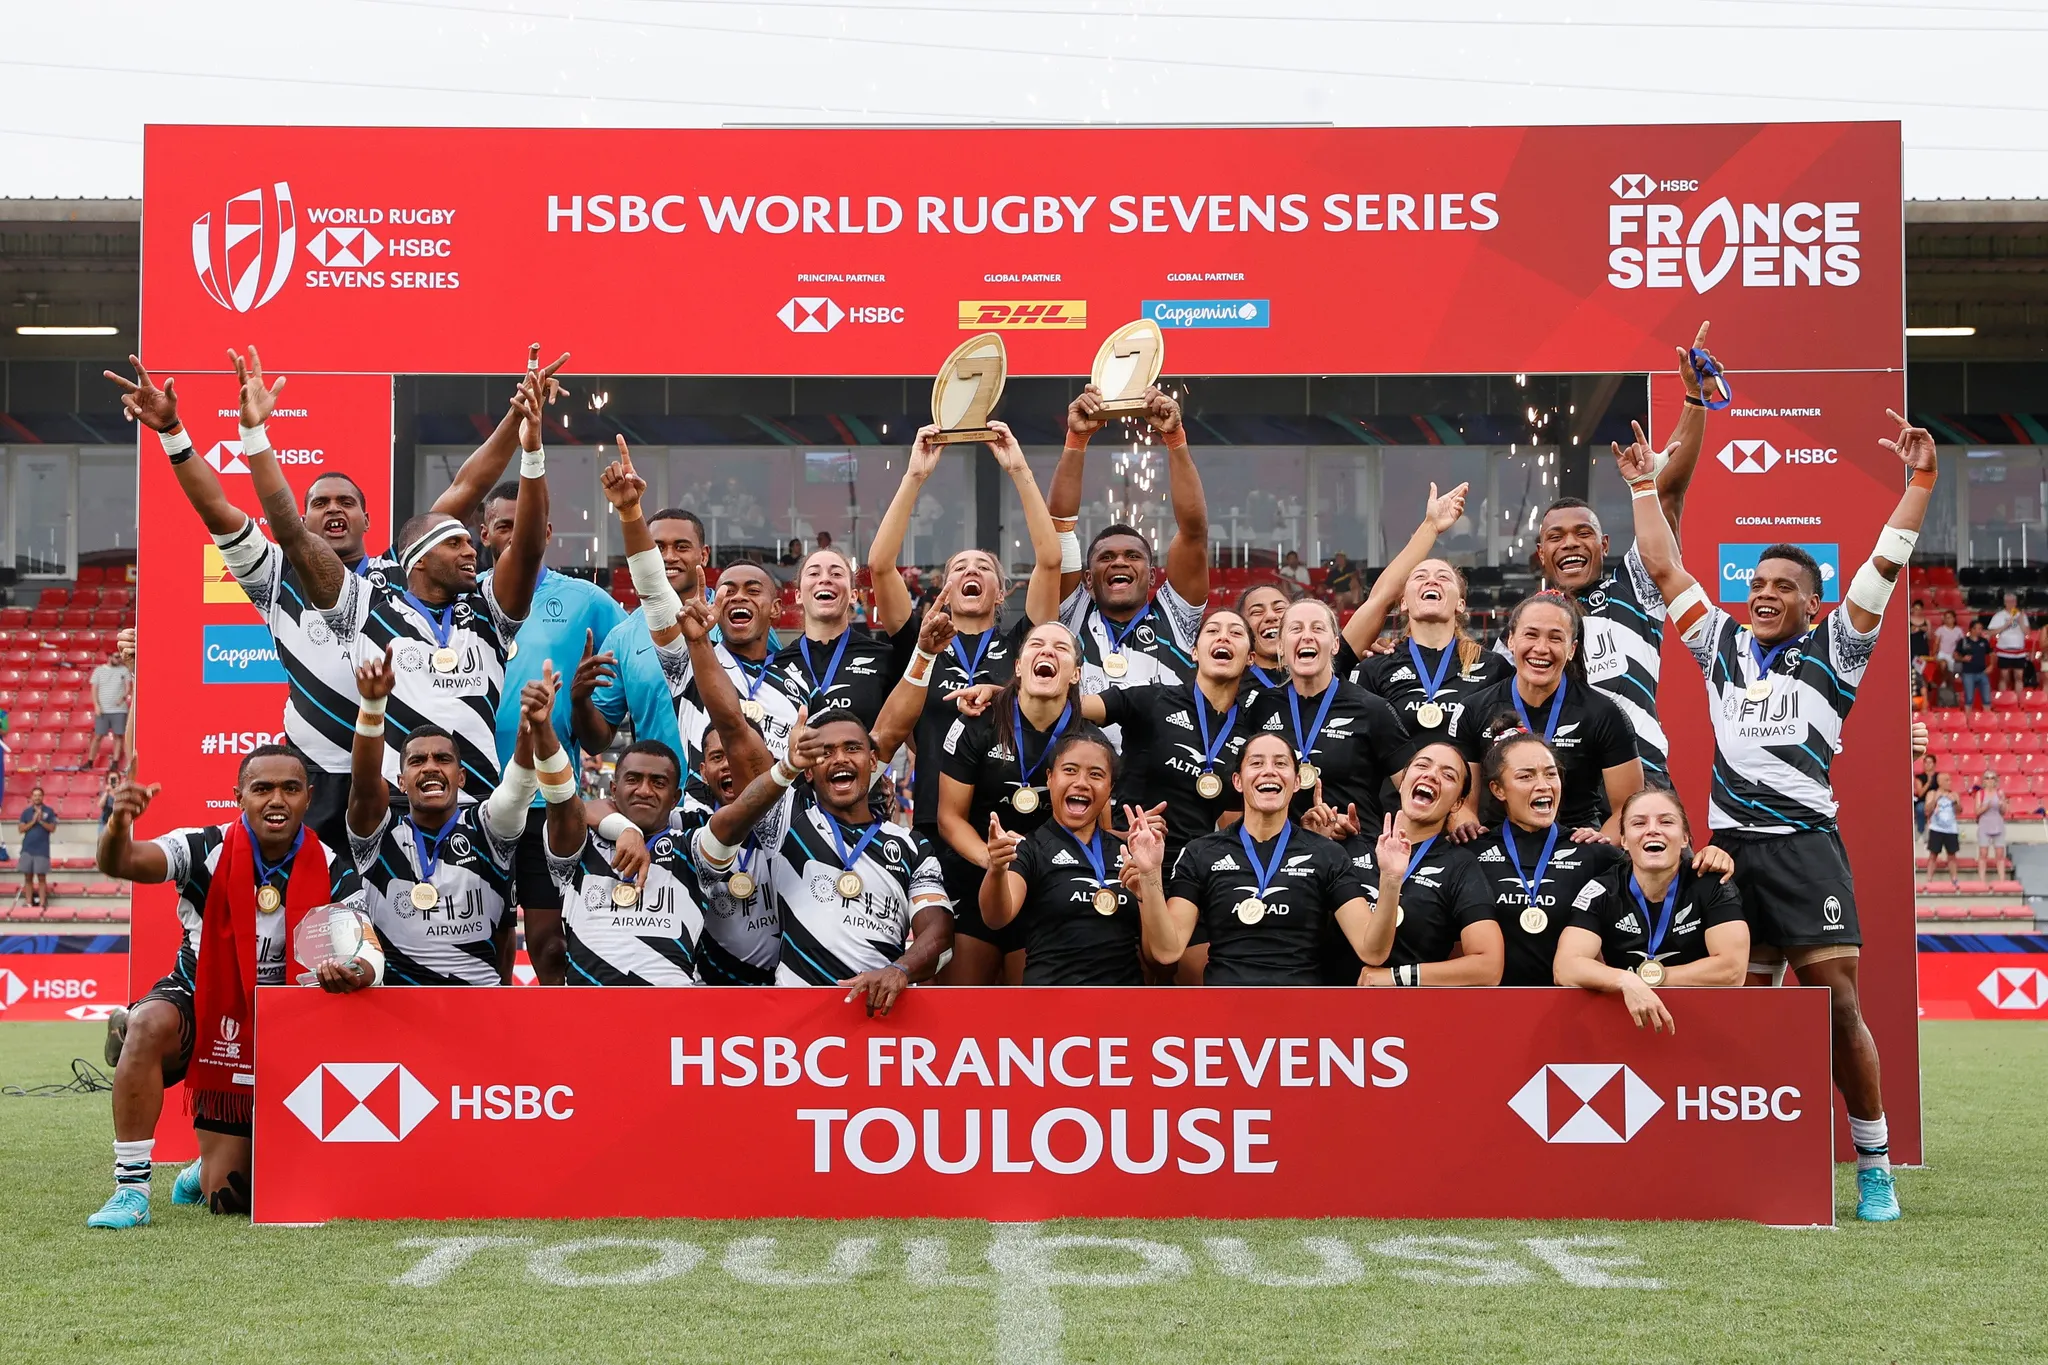 New Zealand women and Fiji men triumph in Toulouse